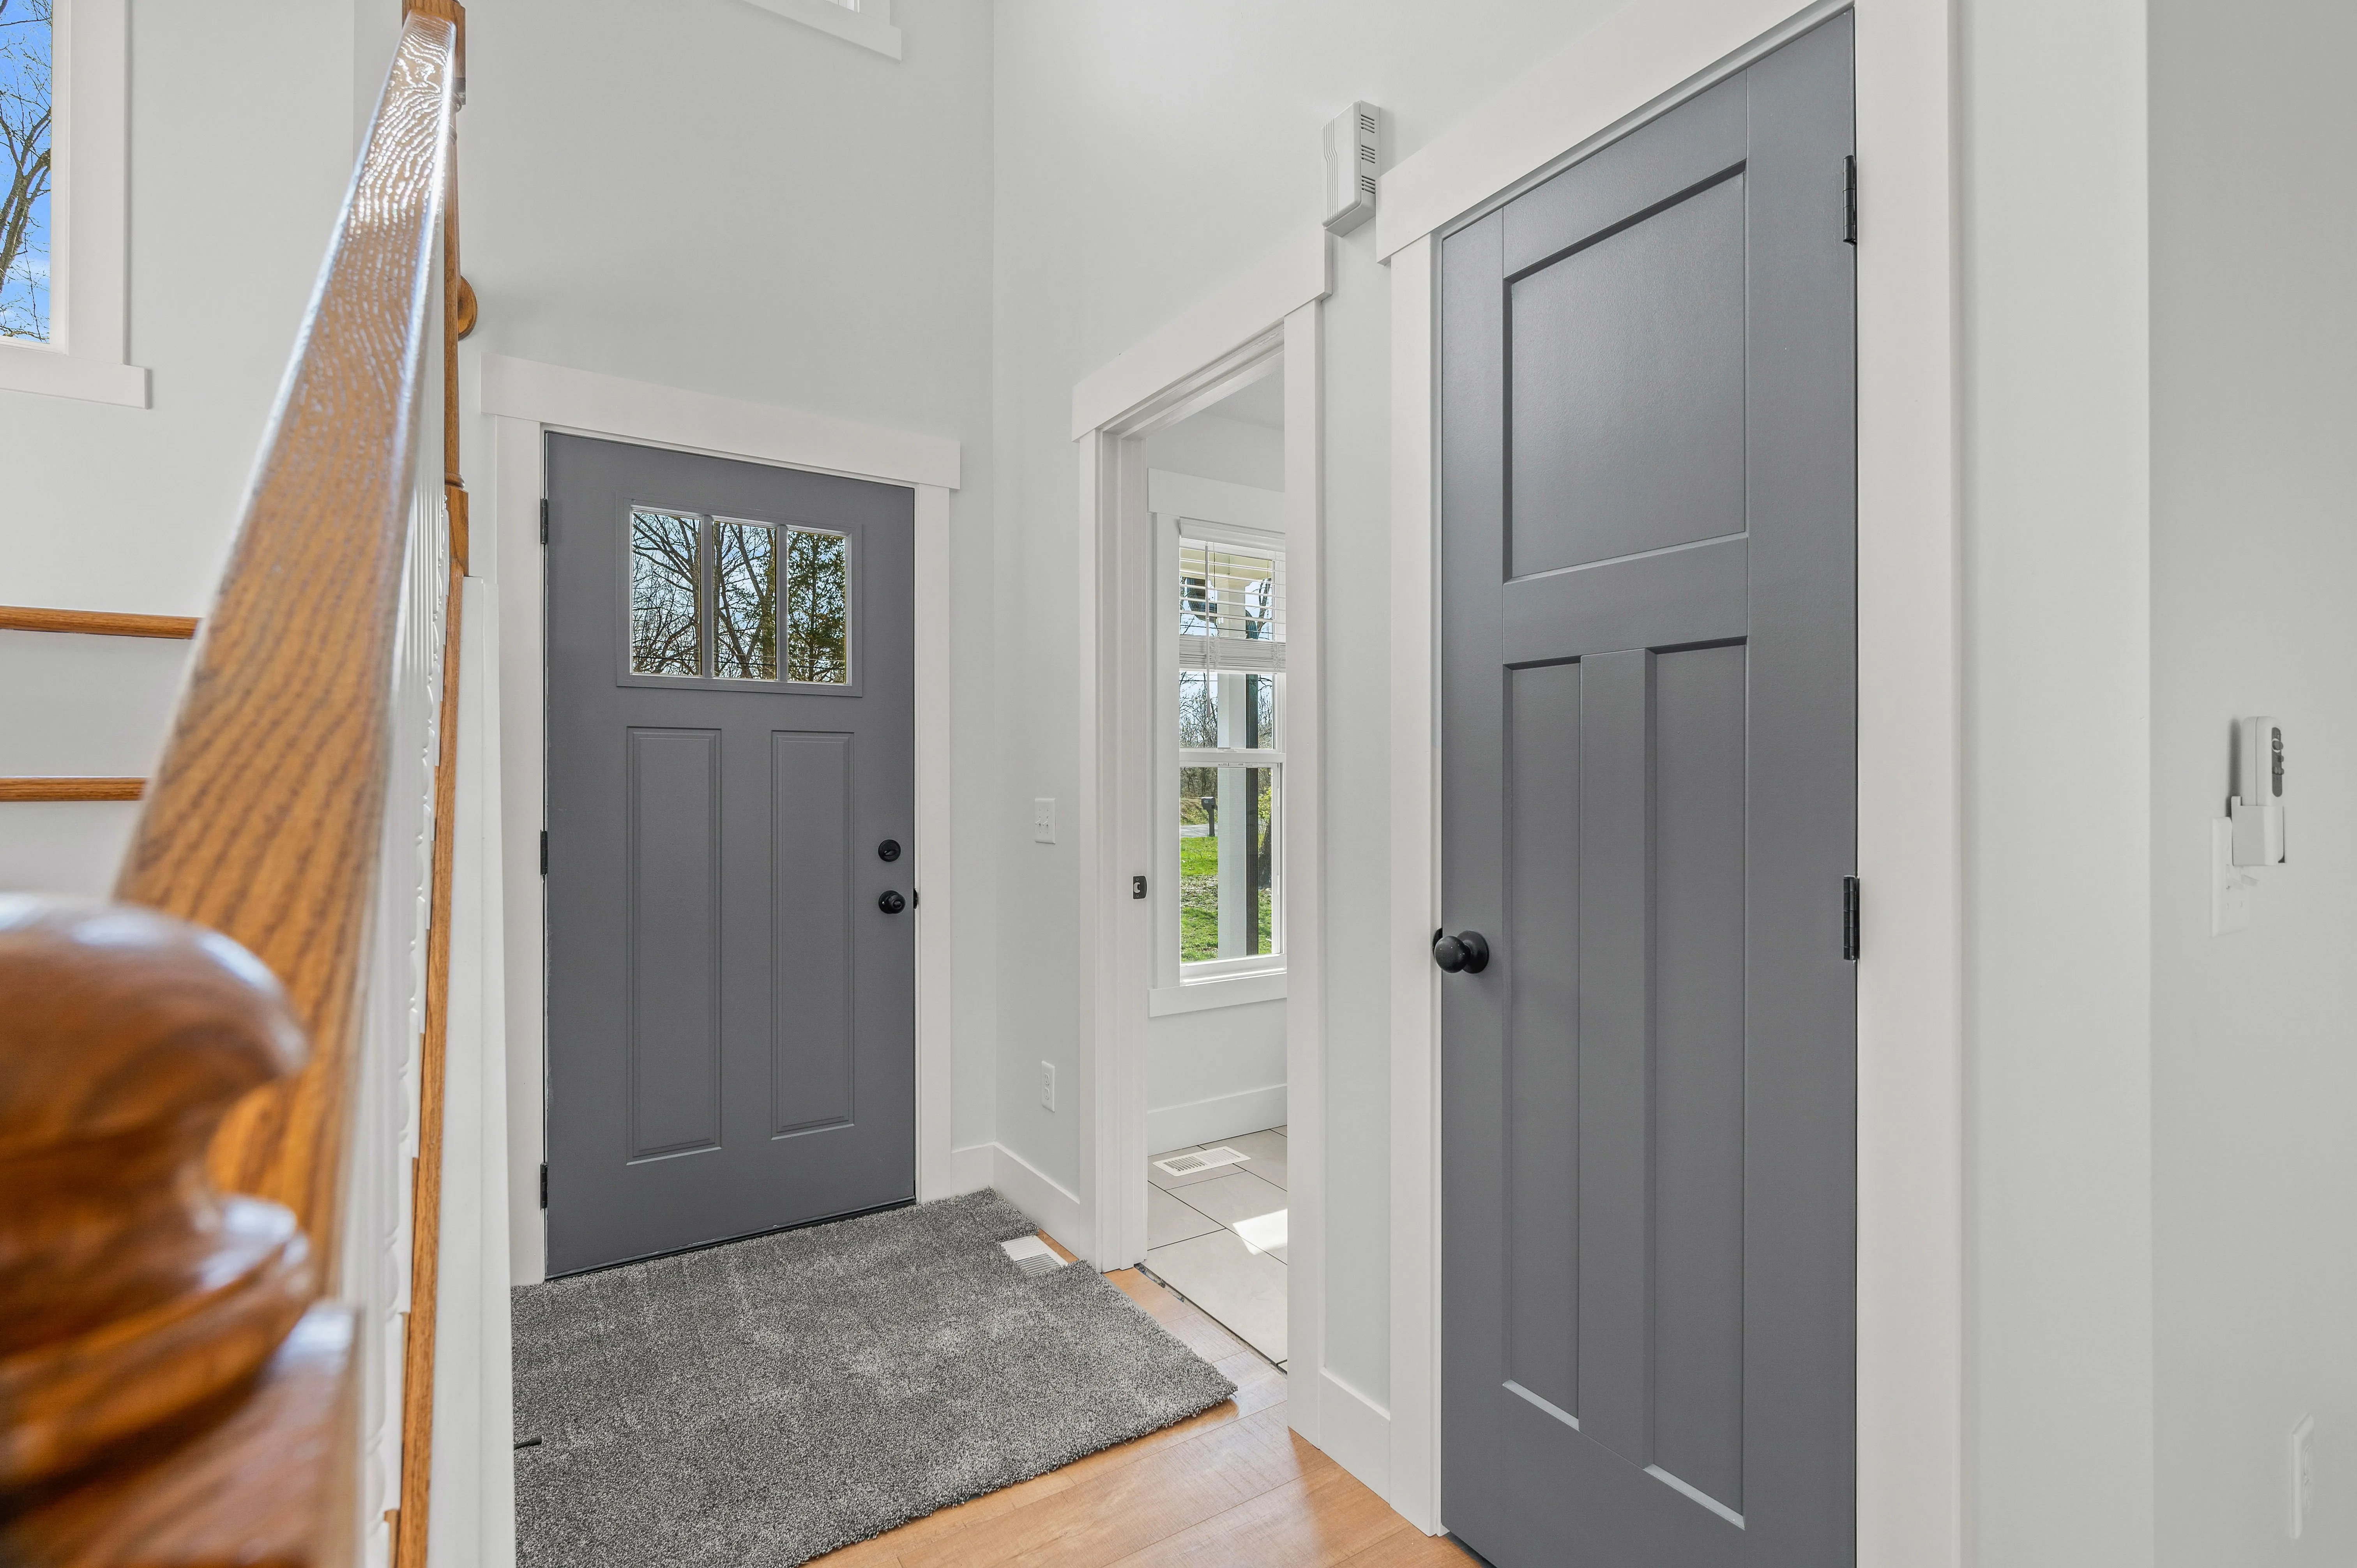 Bright interior hallway with wooden stair railing on the left, two gray doors, and a small window showing outdoor greenery.